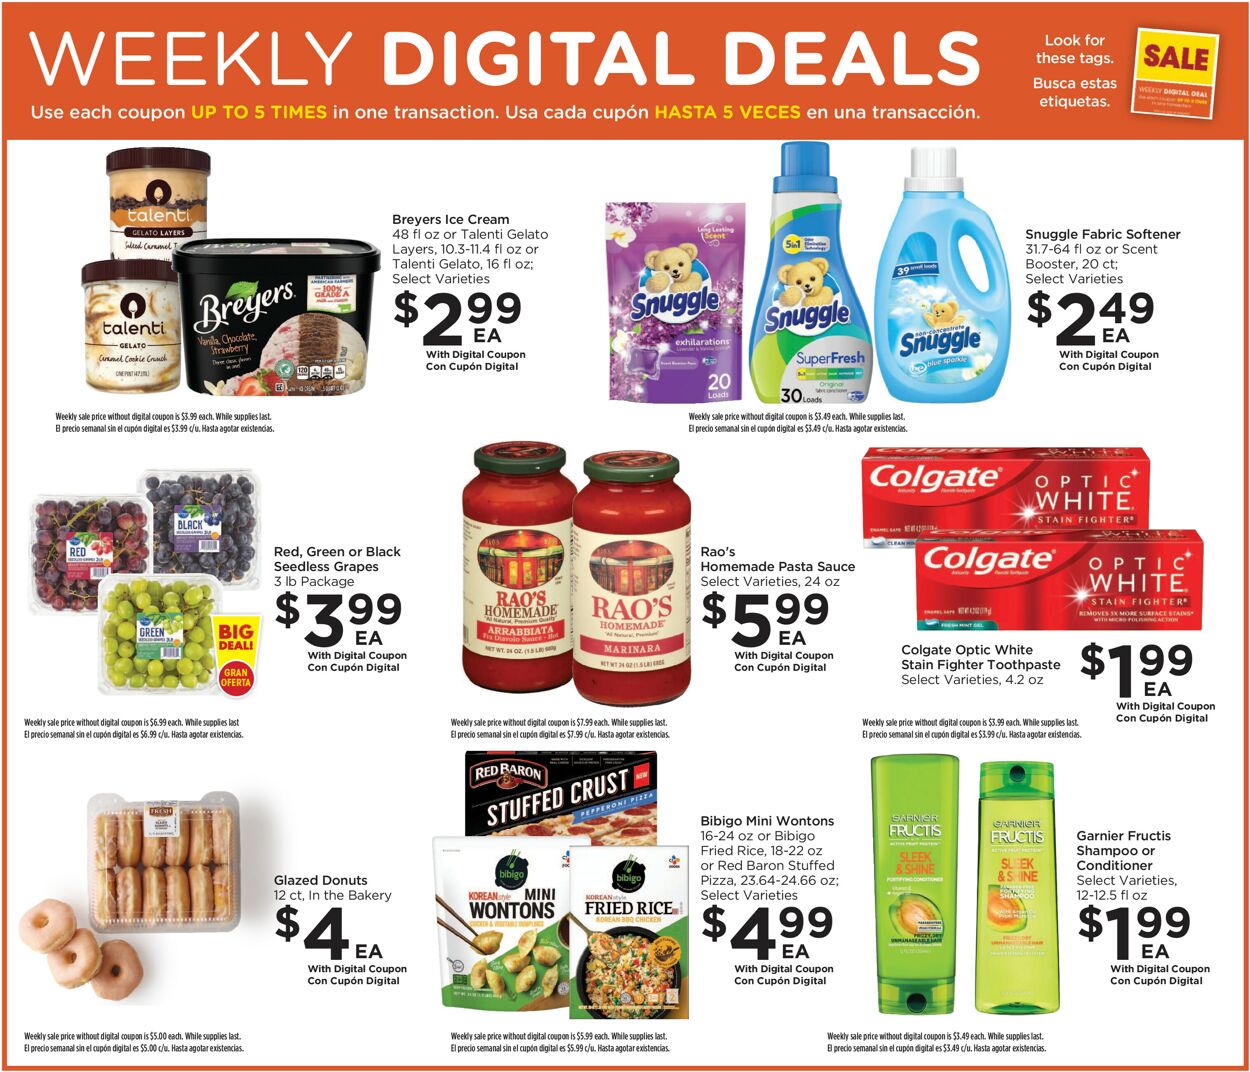 Foods Co. Ad from 01/18/2023